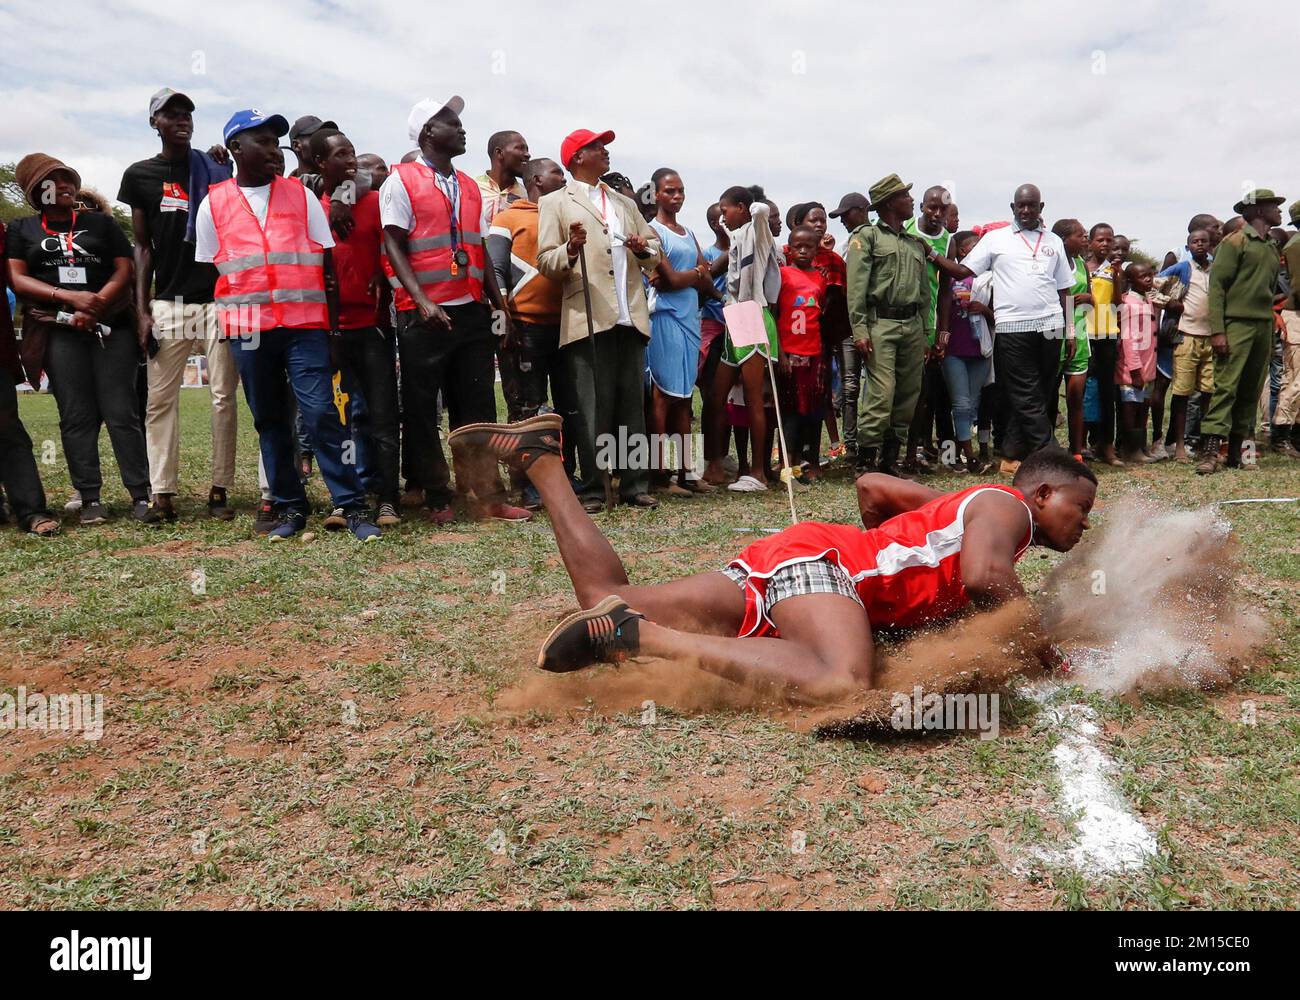 A Maasai Moran falls after throwing a javelin as he competes in in a social sporting event dubbed the Maasai Olympics to offer the warriors an alternative to killing lions as part of their traditional rite of passage, in the Kimana sanctuary, at the base of Mt. Kilimanjaro, near the Kenya-Tanzania border in Kimana, Kajiado, Kenya December 10, 2022. REUTERS/Thomas Mukoya Stock Photo